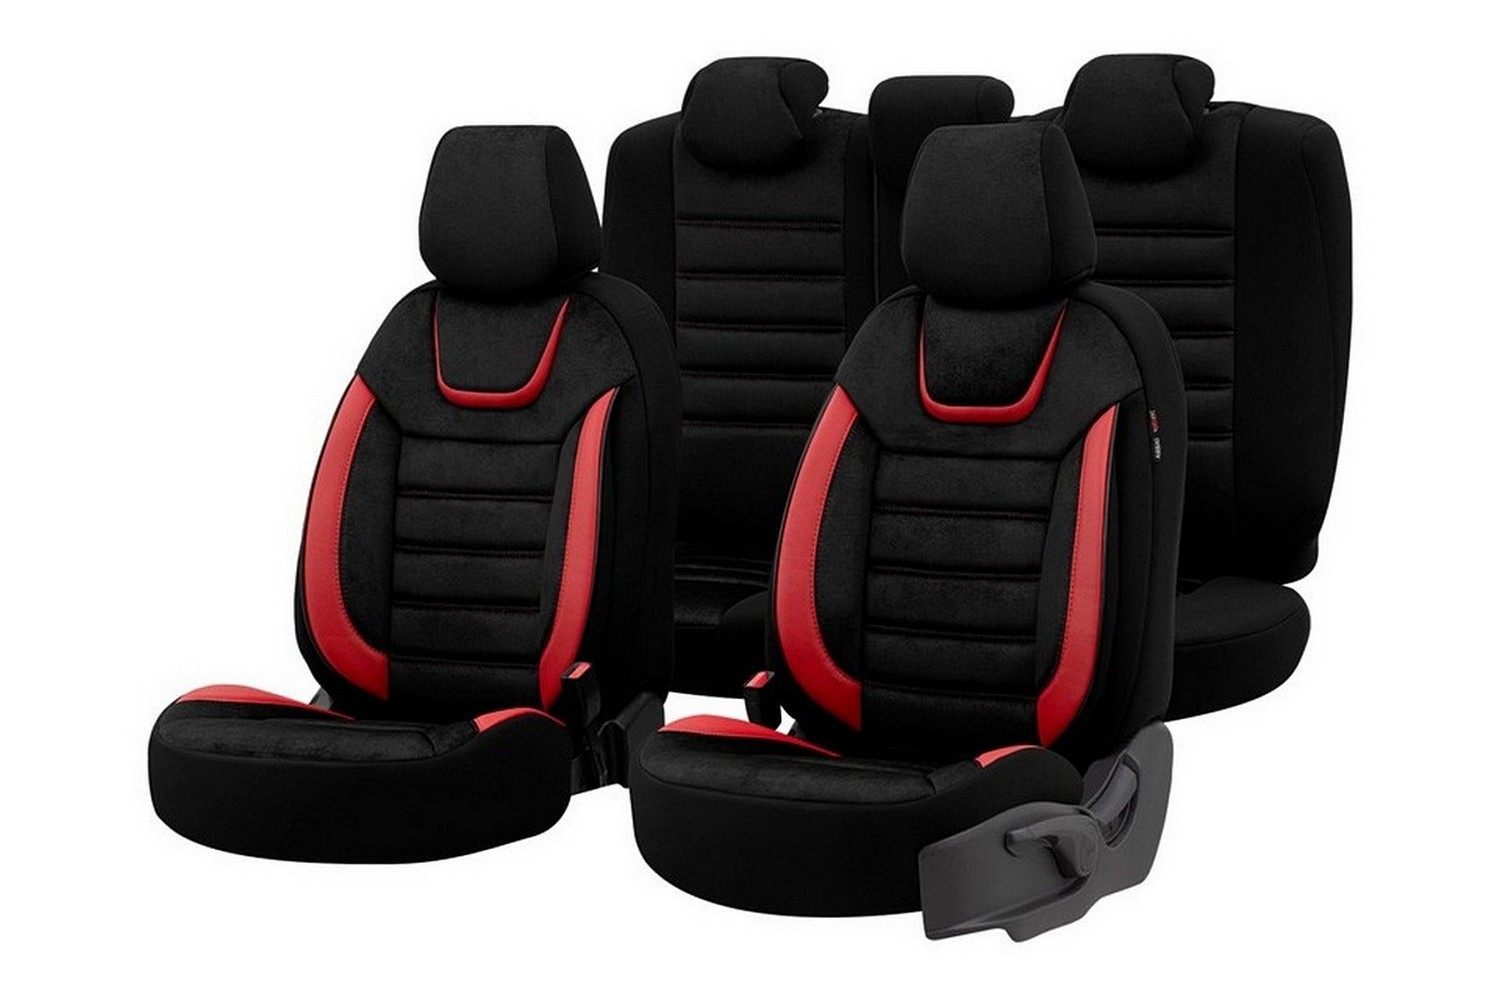 https://www.carparts-expert.com/images/stories/virtuemart/product/UNI5OT-1-seat-covers-universal-iconic-black-red-1.jpg